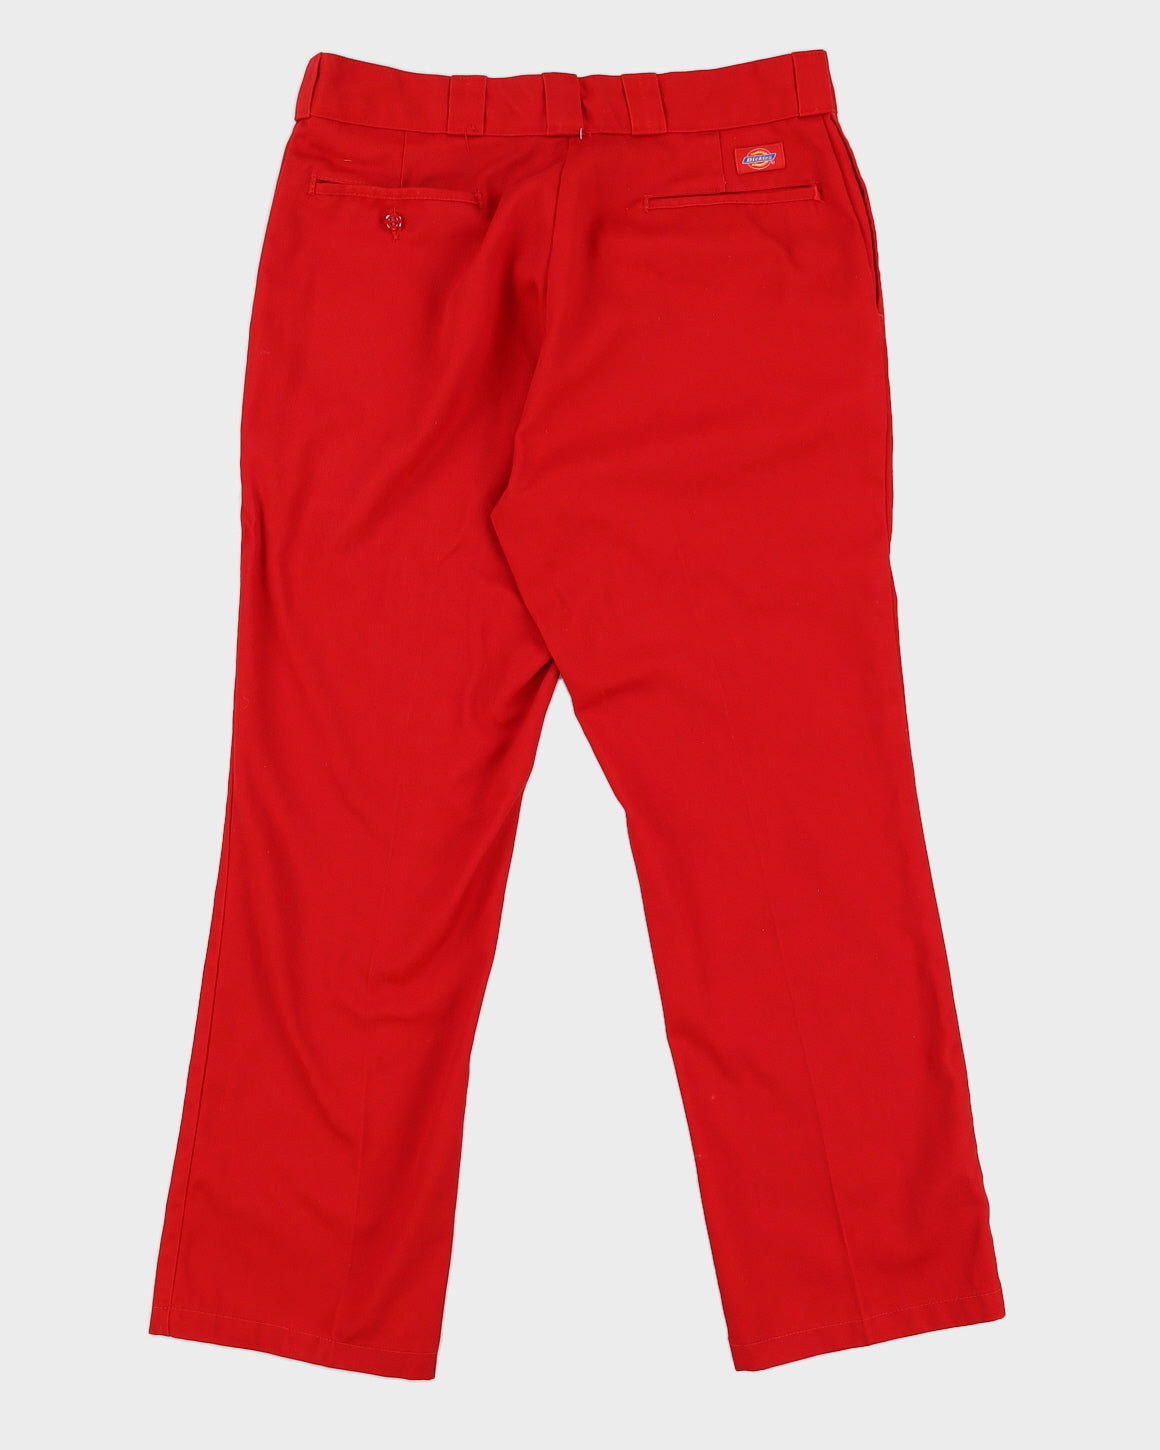 00s Dickies 874 Red Trousers - W36 L30